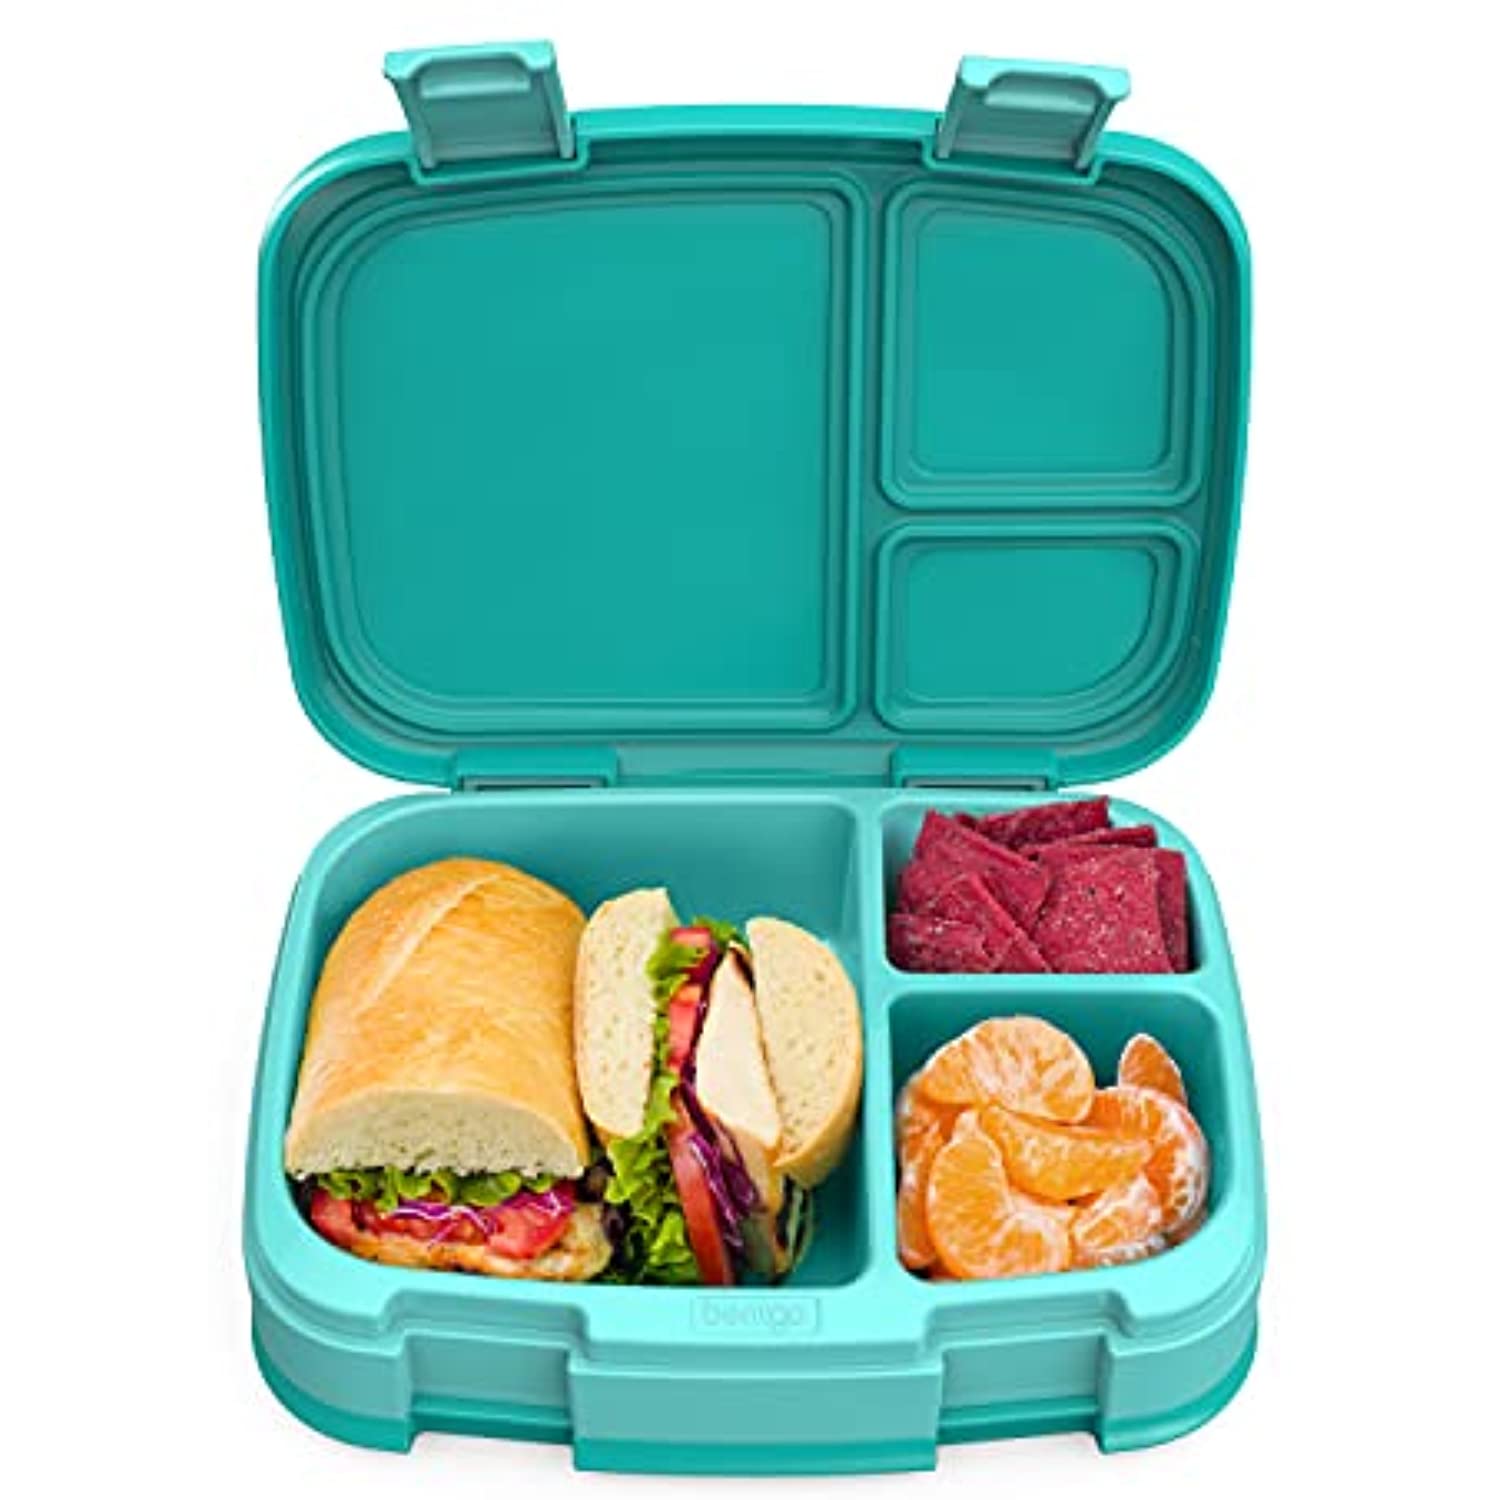 Bentgo Fresh – Leak-Proof, Versatile 4-Compartment Bento-Style Lunch Box with Removable Divider, Portion-Controlled Meals for Teens and Adults On-The-Go – BPA-Free, Food-Safe Materials (Aqua)